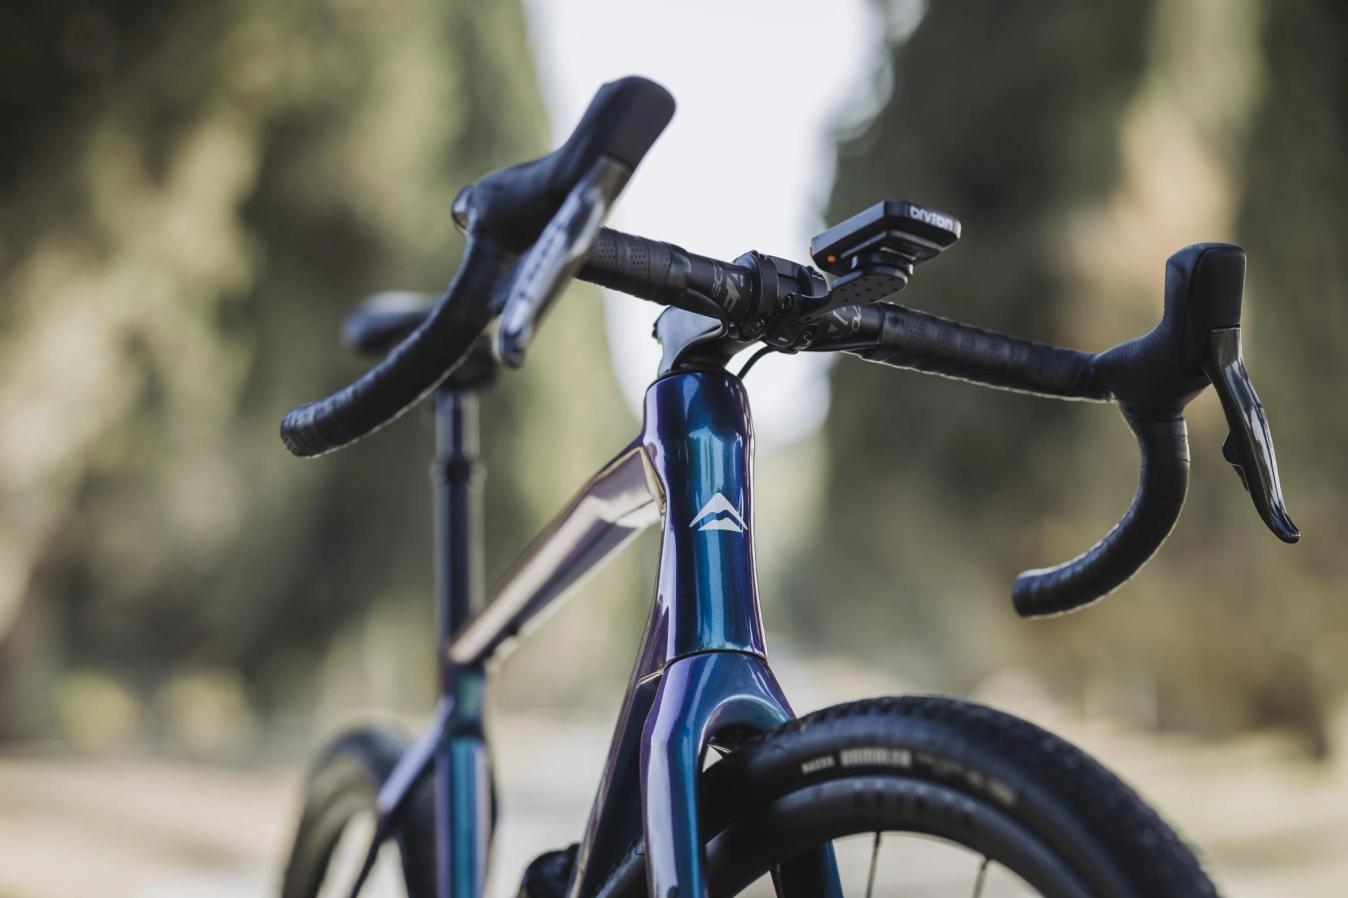 The redesigned head tube gives the bike a sportier look but has a practical purpose